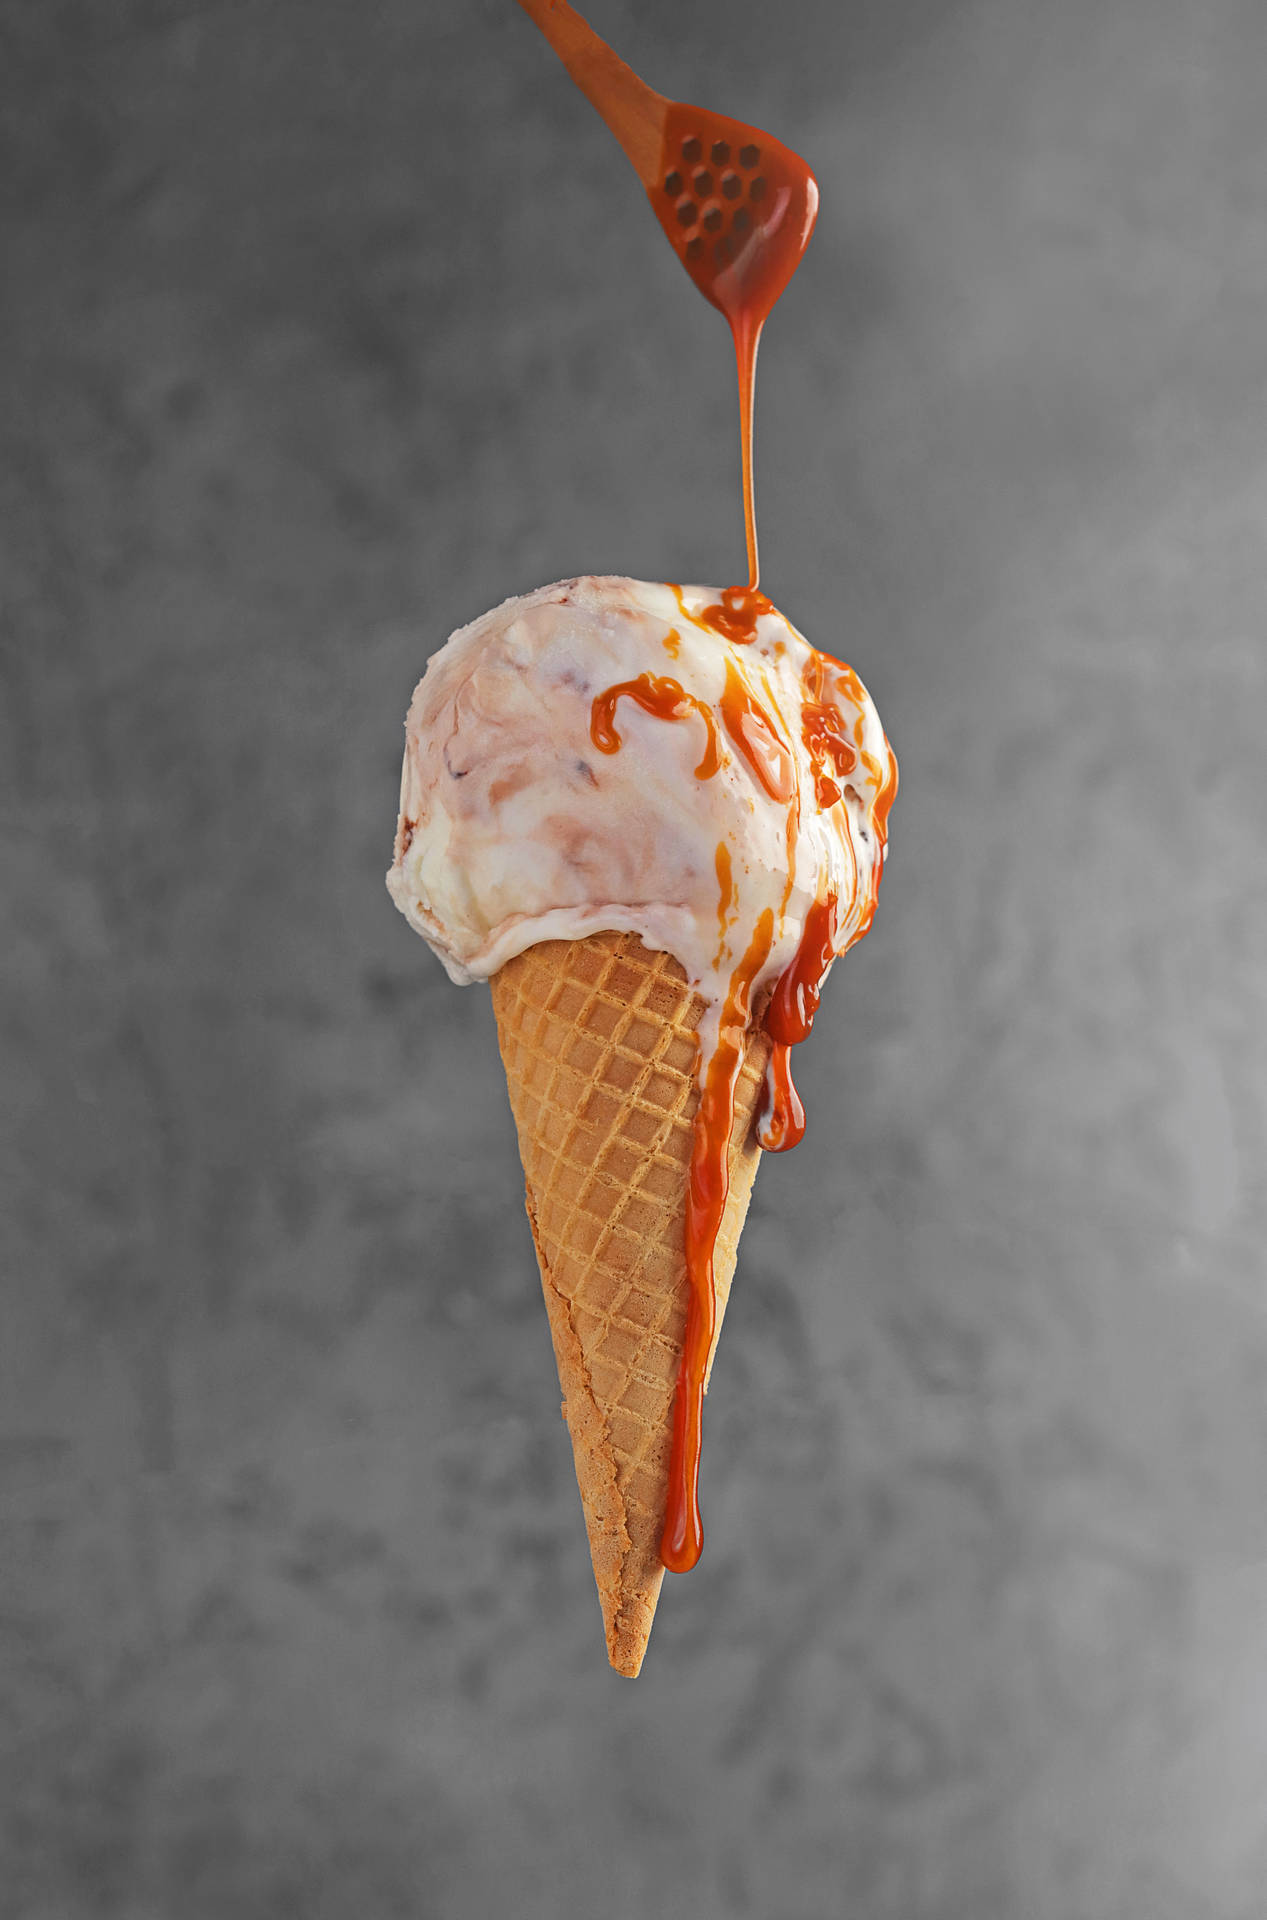 Ice Cream 4165X6311 Wallpaper and Background Image